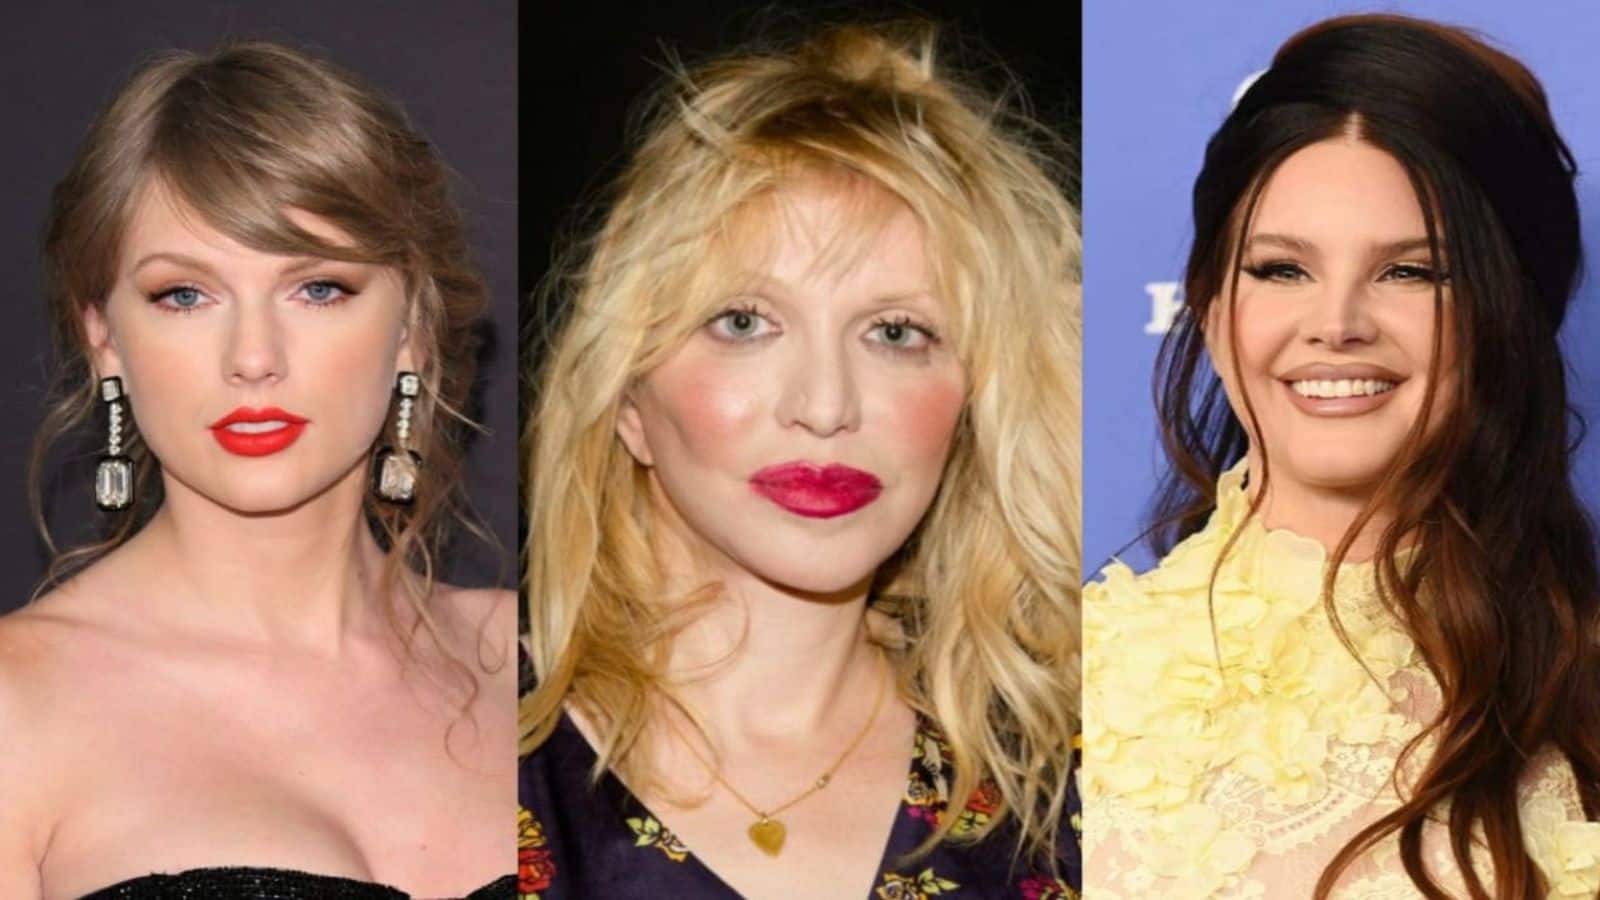 Courtney Love slams Taylor Swift's artistry; says 'she's not important'